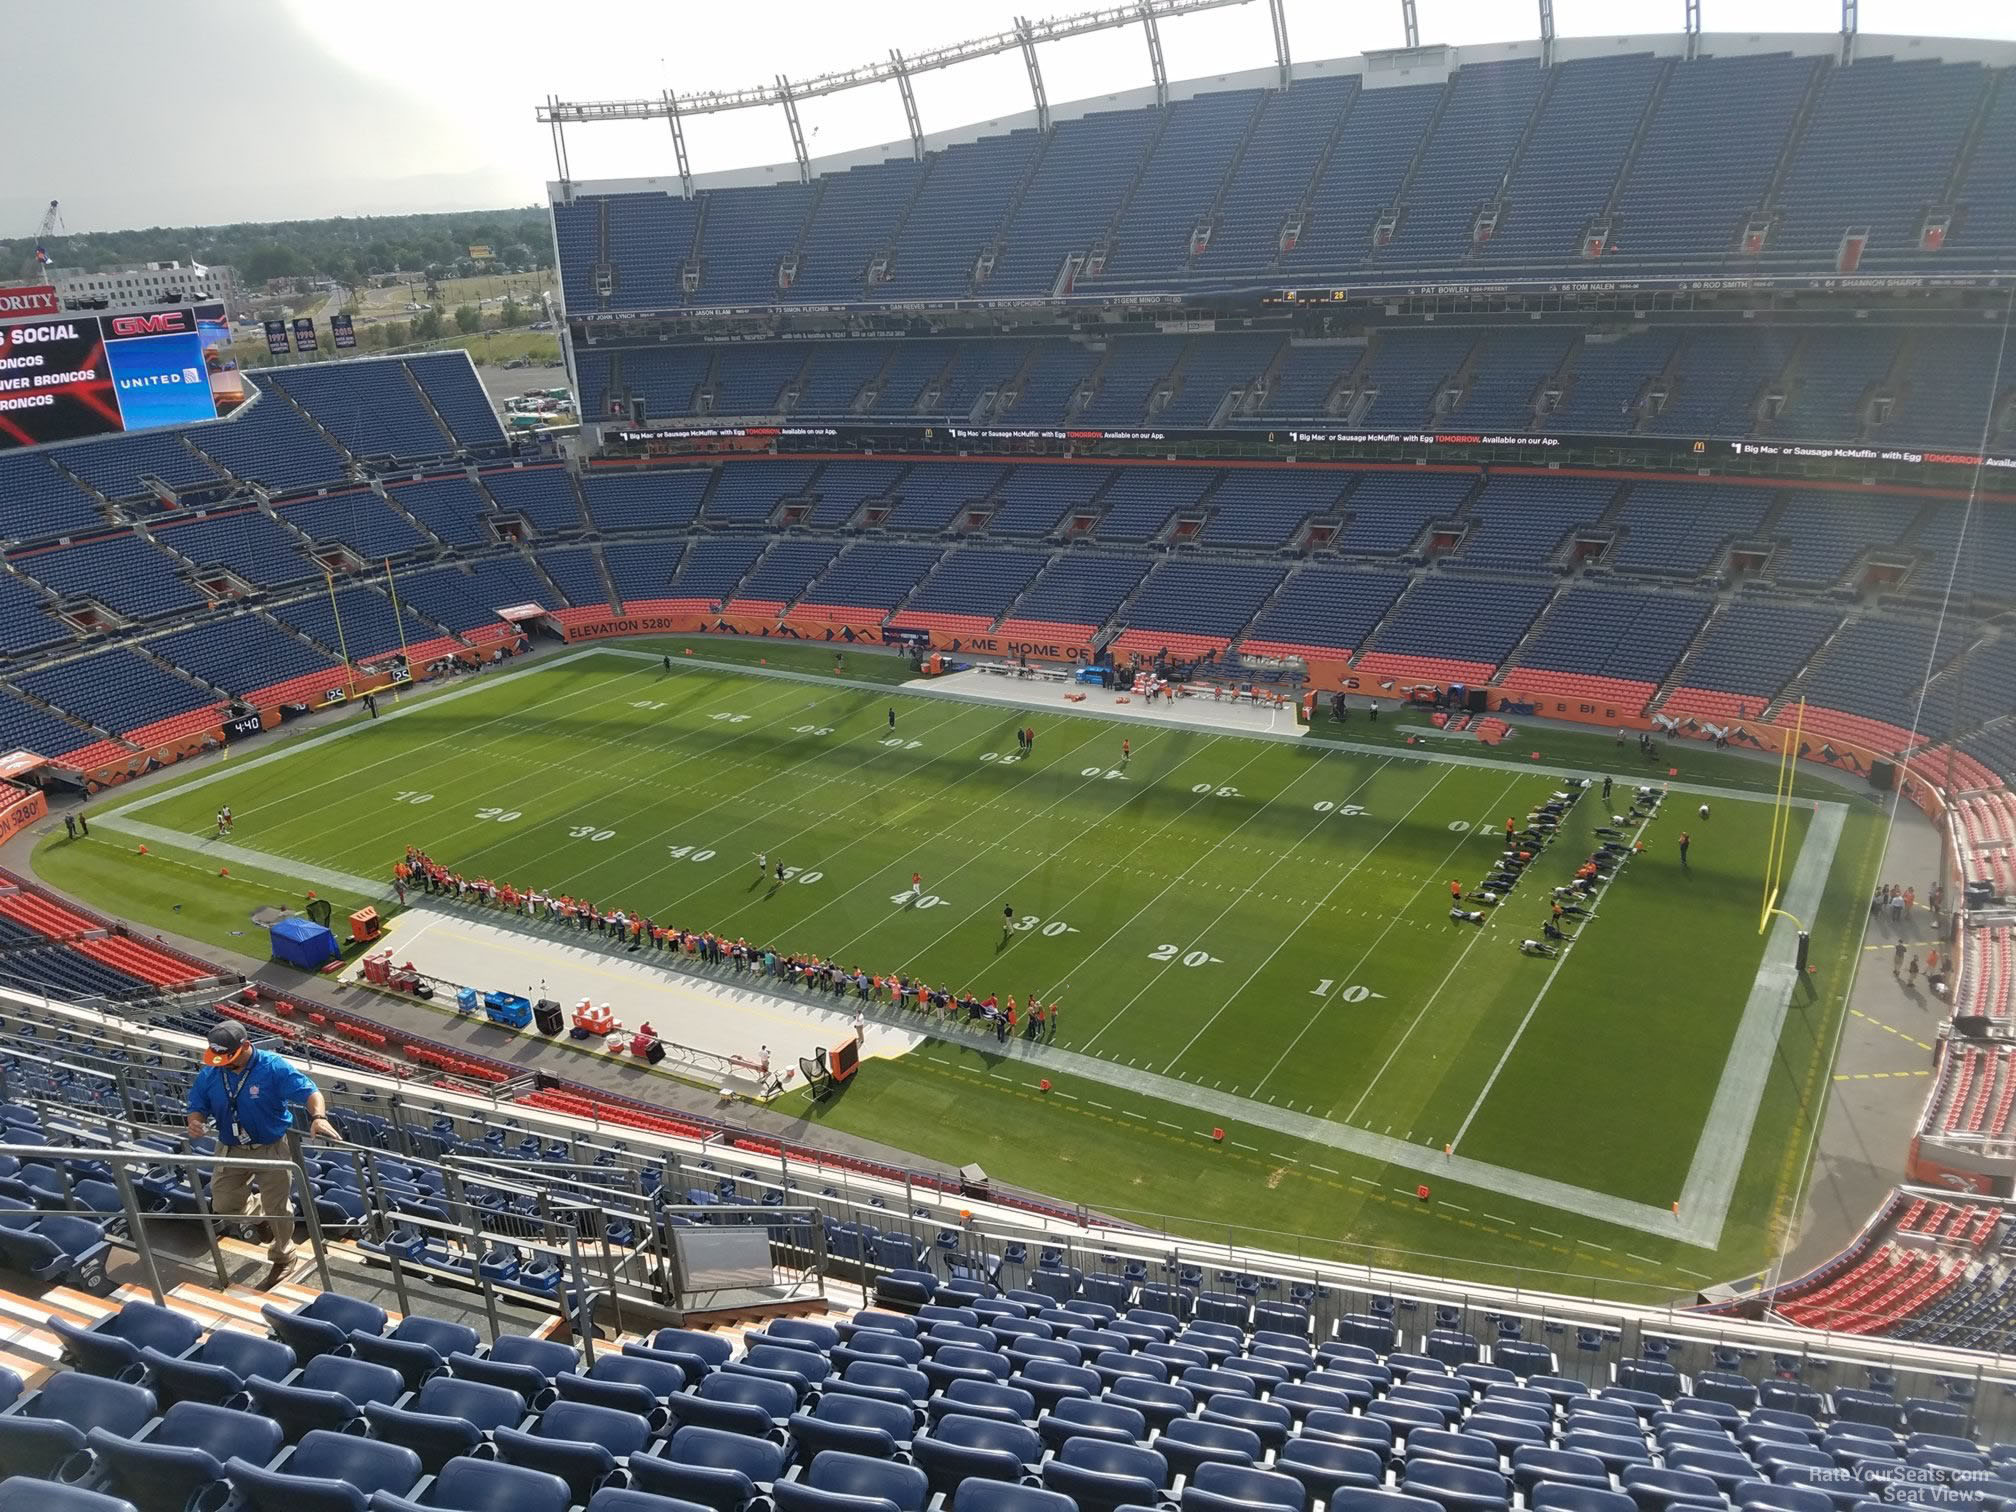 section 529, row 16 seat view  - empower field (at mile high)